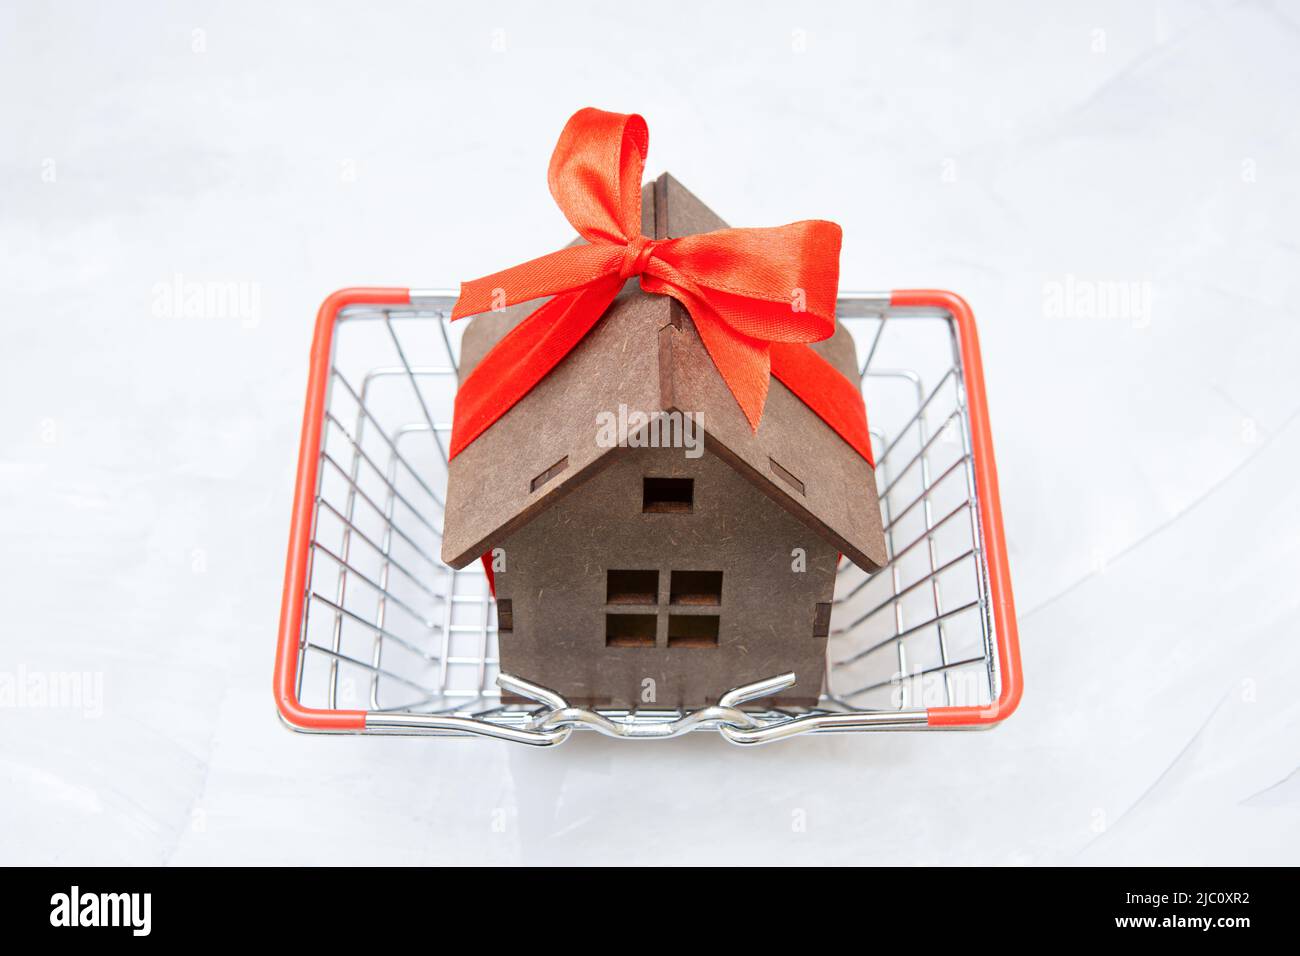 Wooden toy house decorated with a red ribbon and a bow in a tiny shopping cart. Home buying concept. Stock Photo